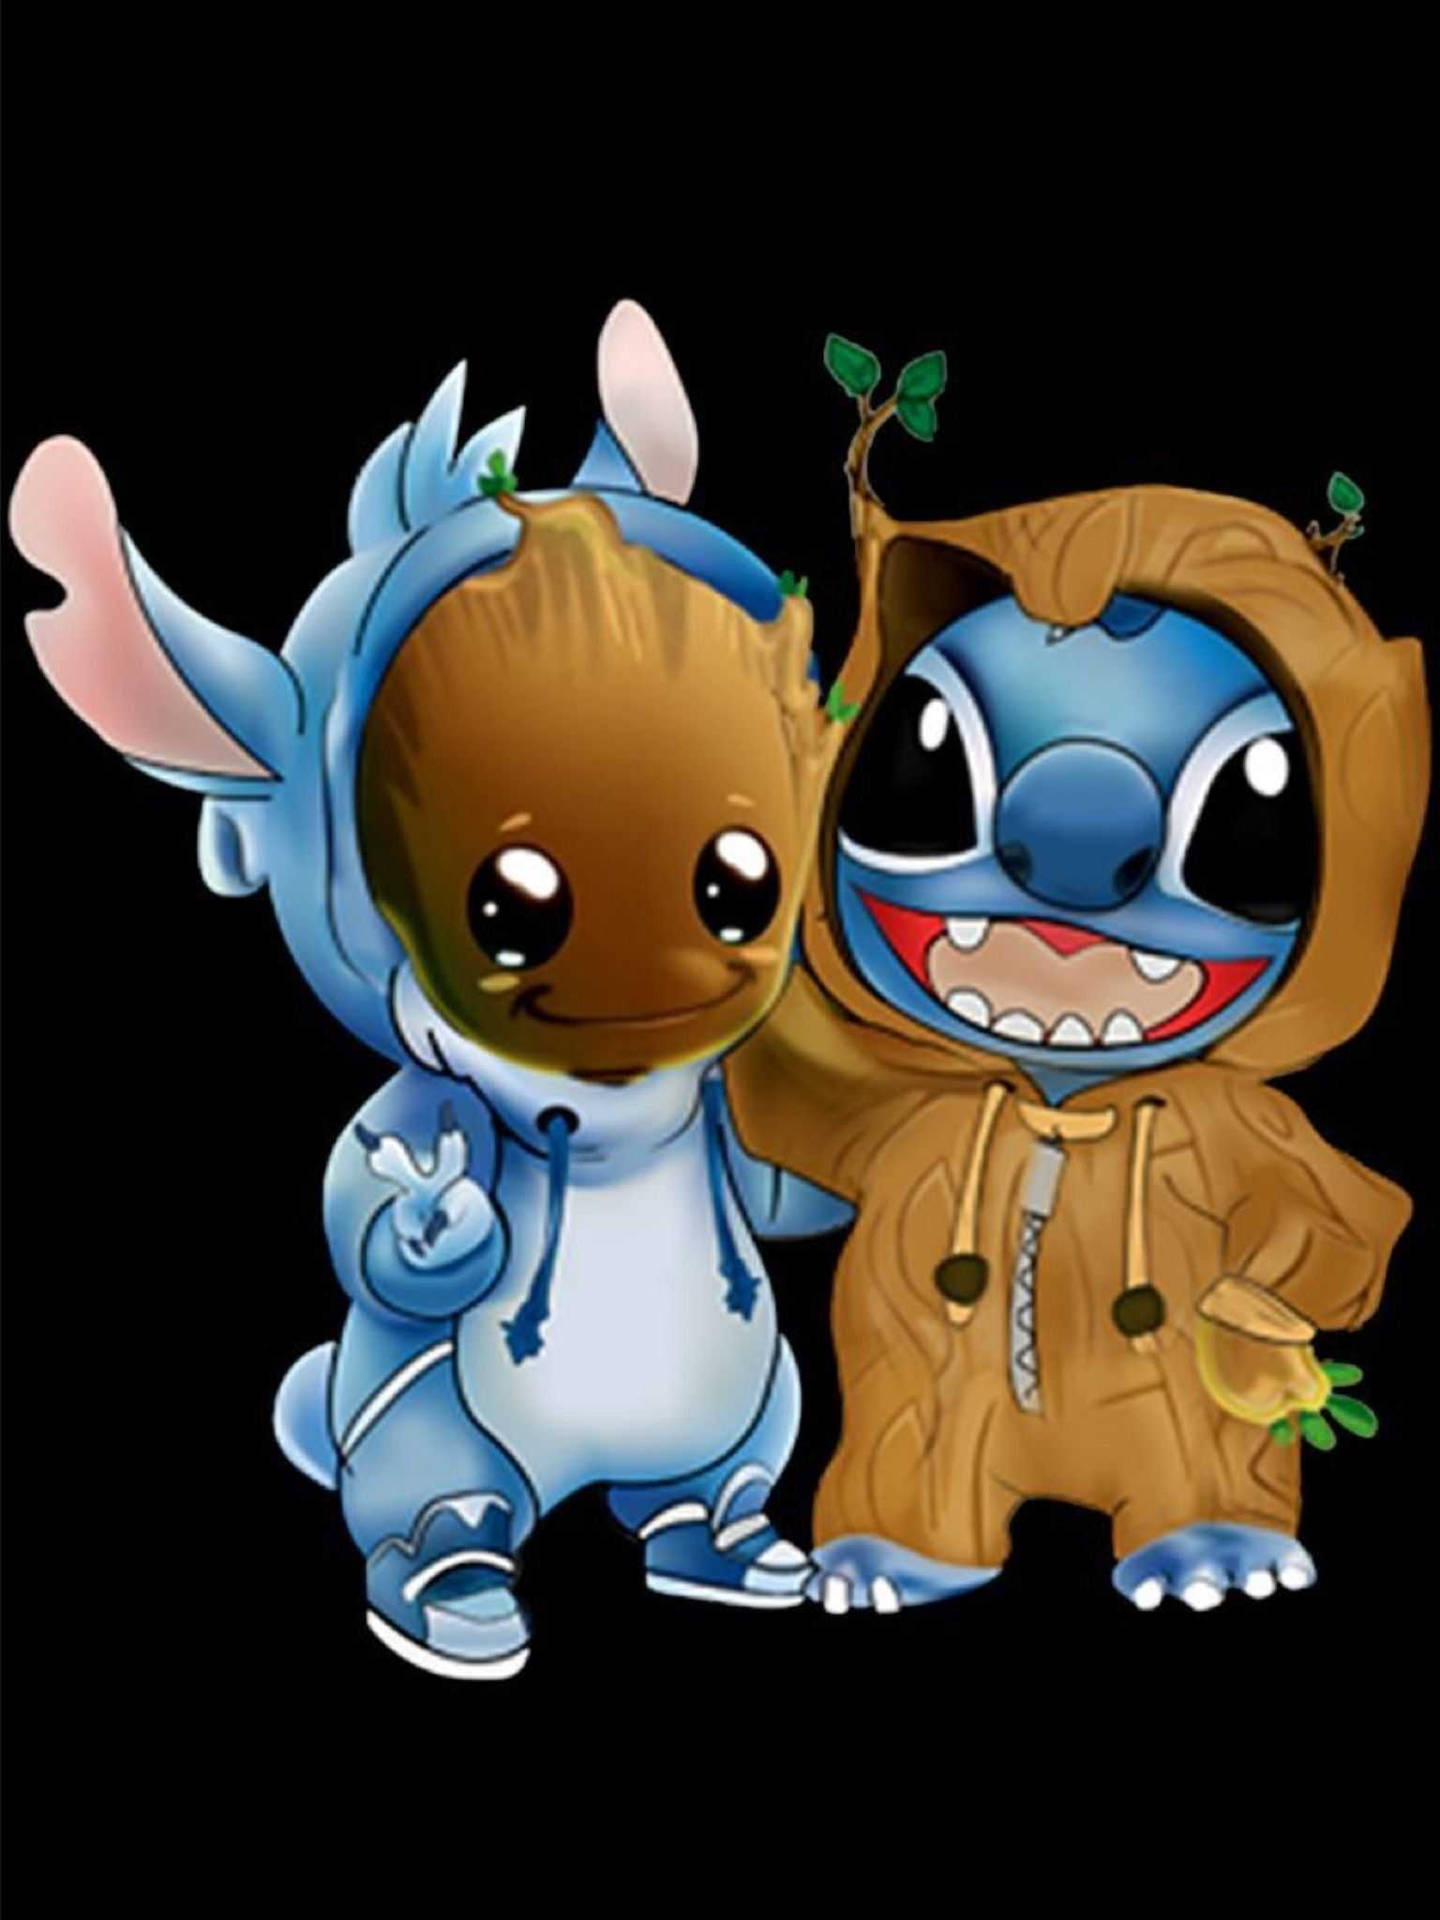 Cute Stitch With Groot Wallpaper